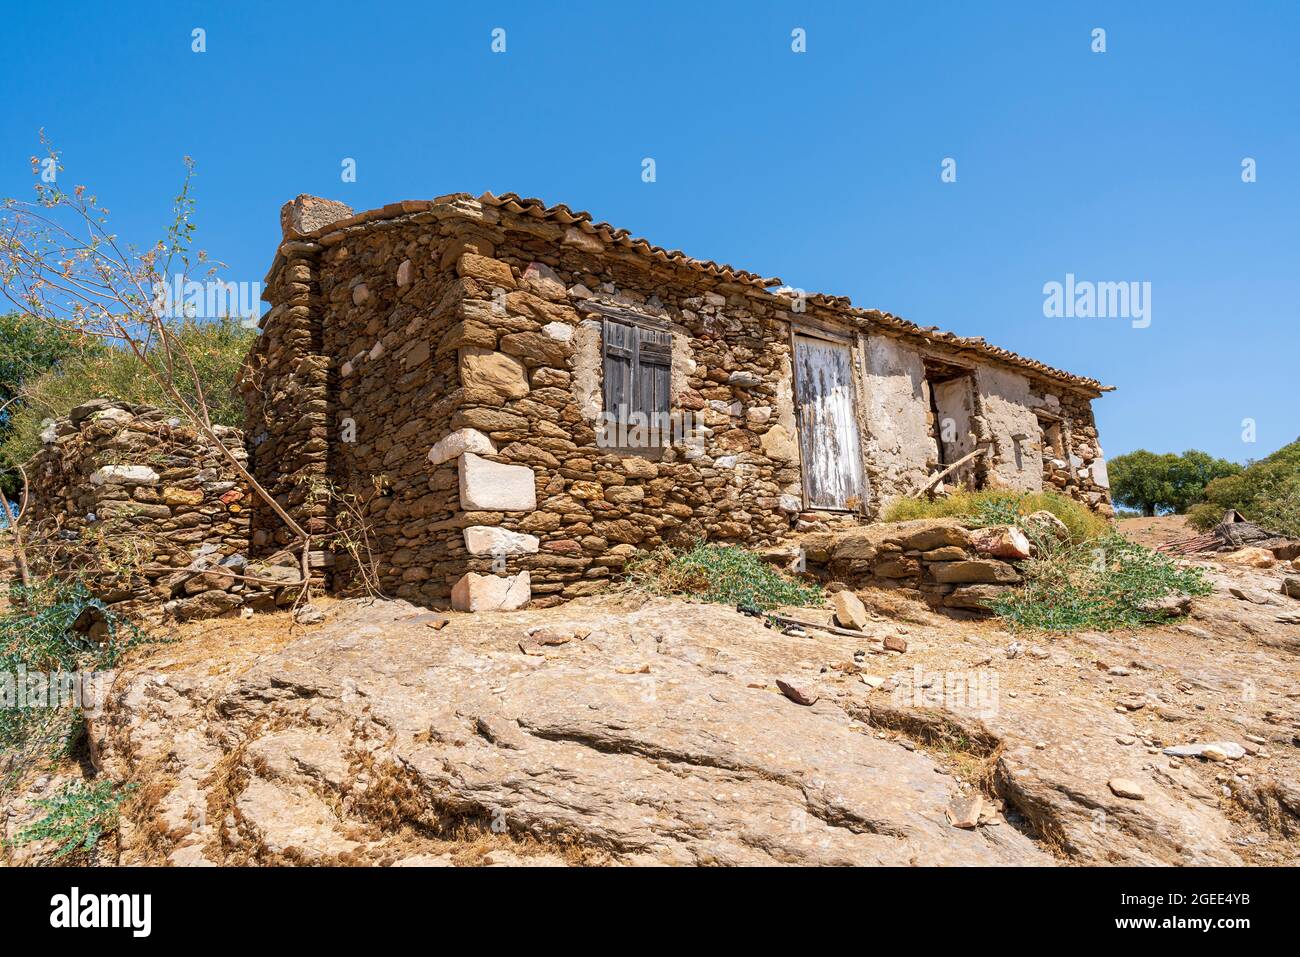 old ruined town house Stock Photo